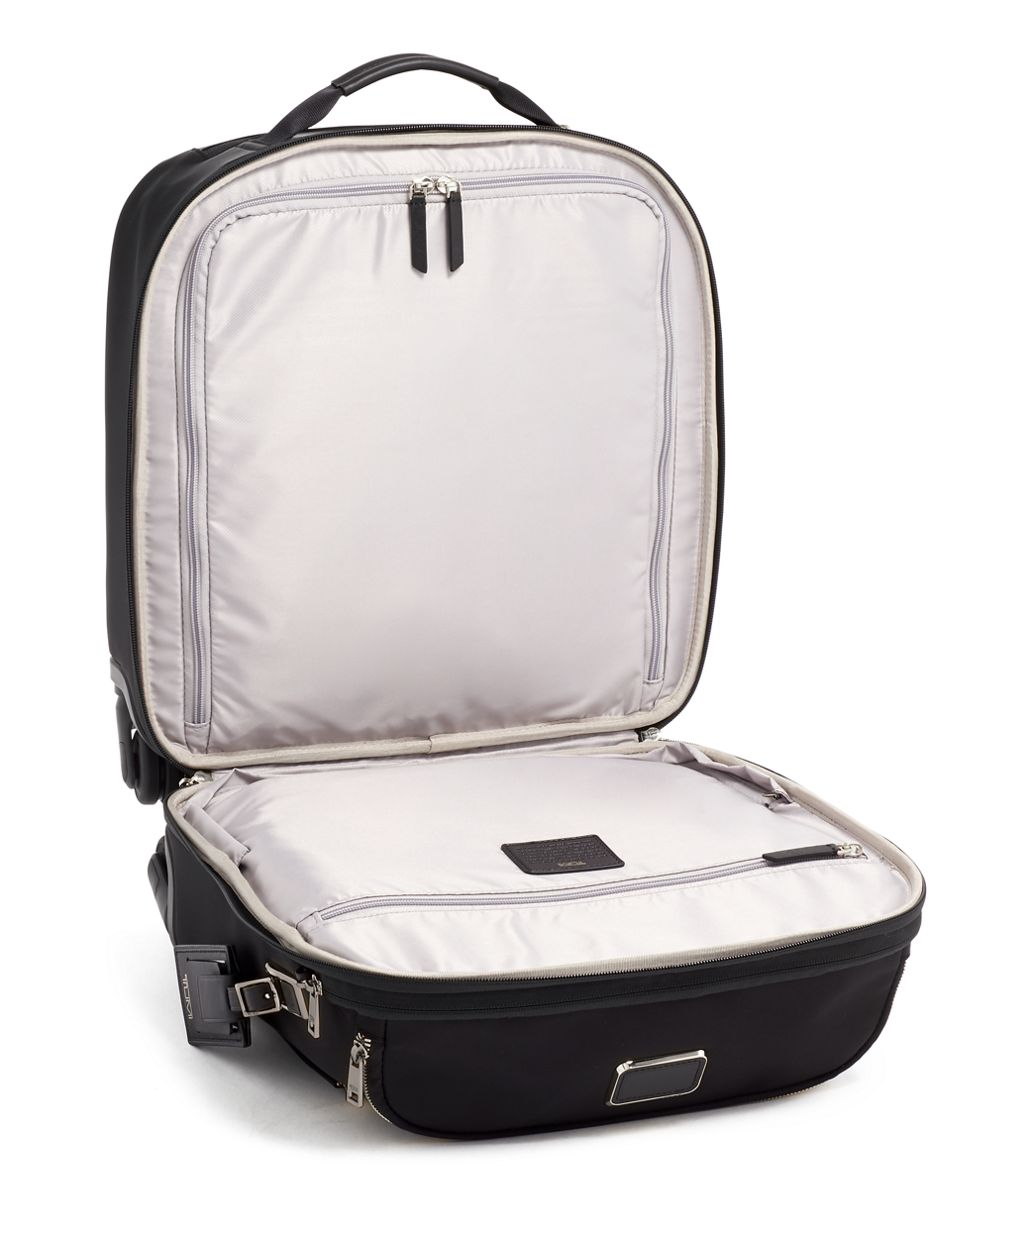 Tumi Oxford Compact 16" Softside Carry-On